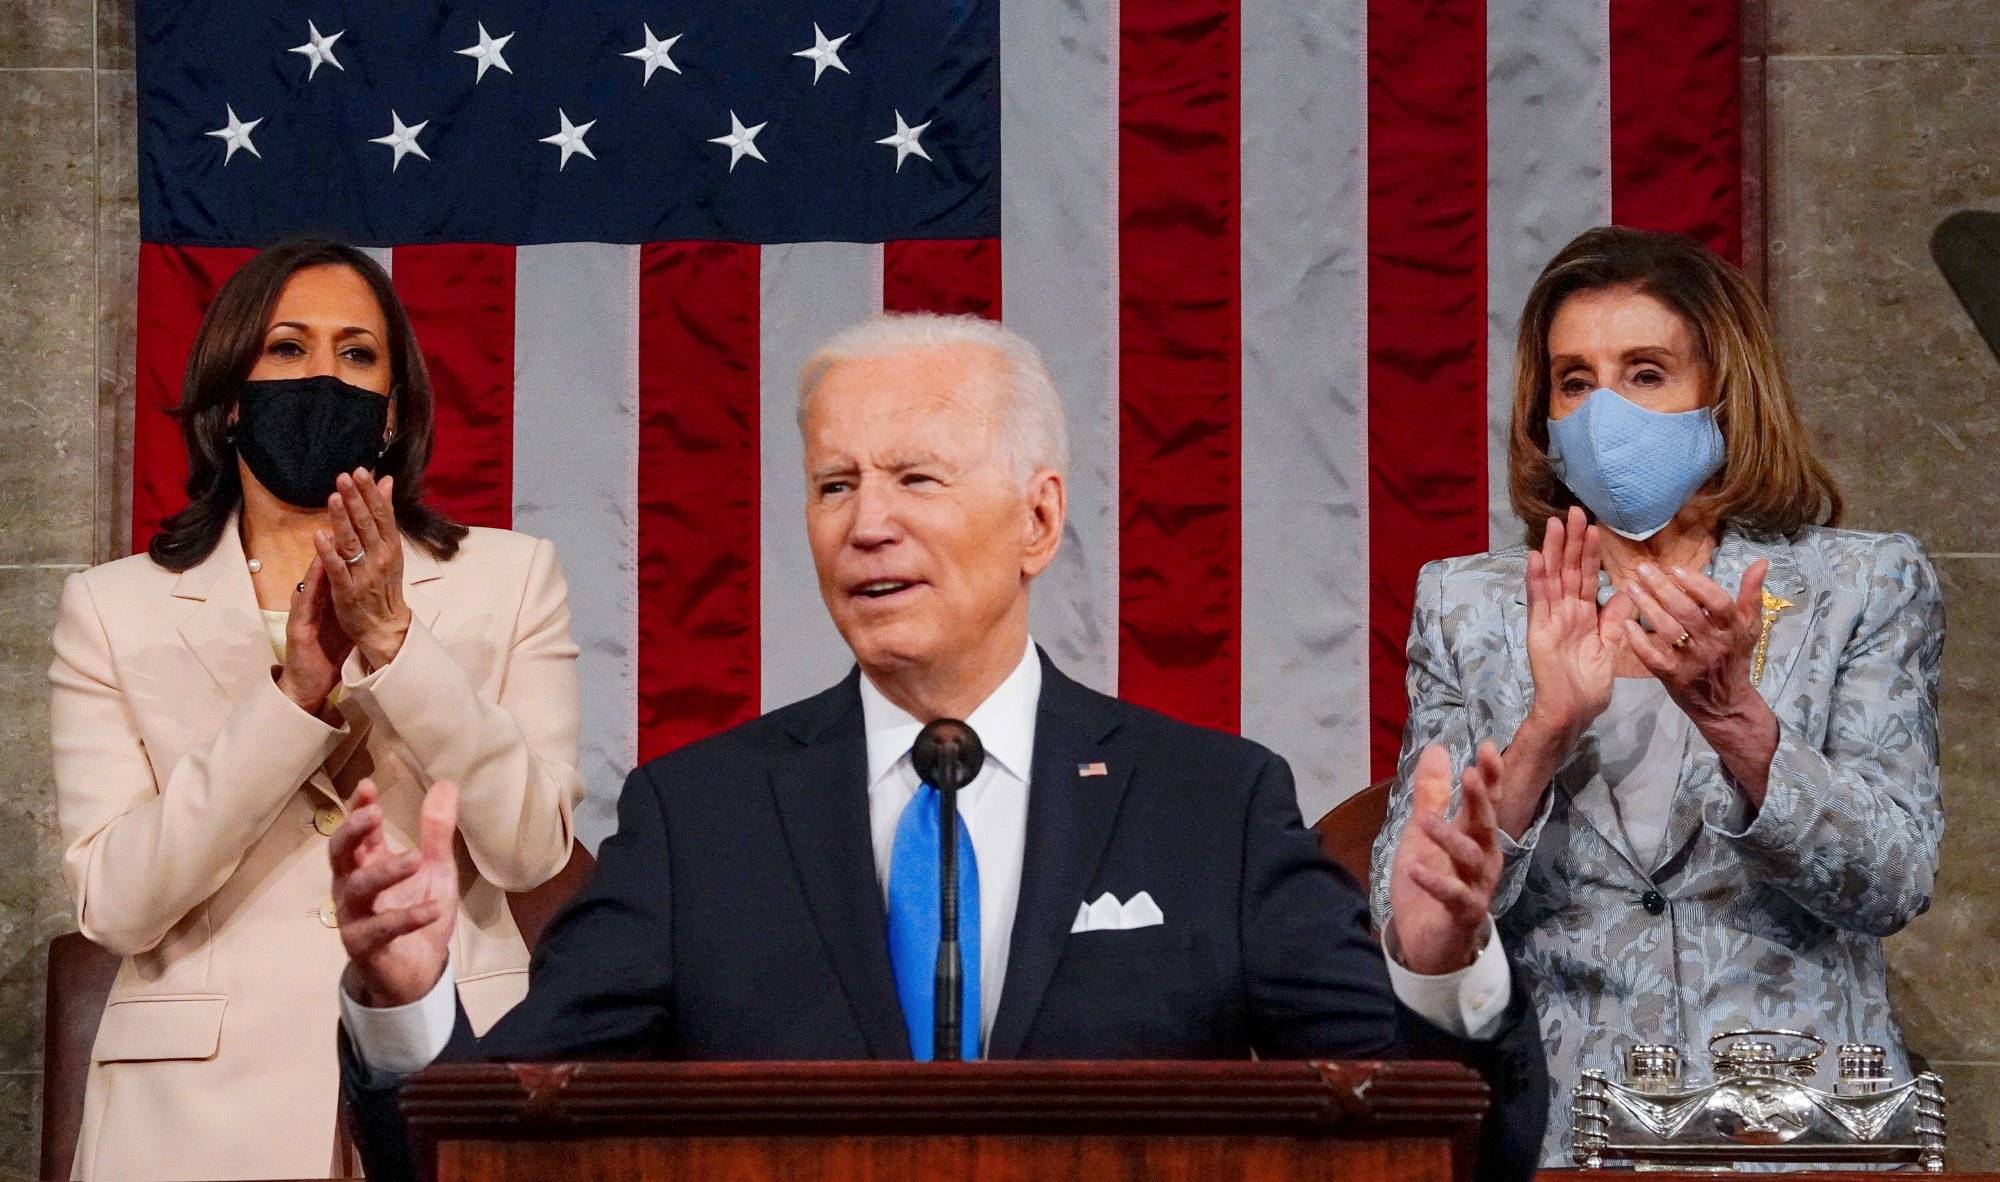 WASHINGTON, DC - APRIL 28: President Joe Biden addresses a joint session of Congress, with Vice President Kamala Harris and House Speaker Nancy Pelosi (D-Calif.) on the dais behind him, on Wednesday, April 28, 2021. Biden spoke to a nation seeking to emerge from twin crises of pandemic and economic slide in his first speech to a joint session of Congress. (Melina Mara/The Washington Post)